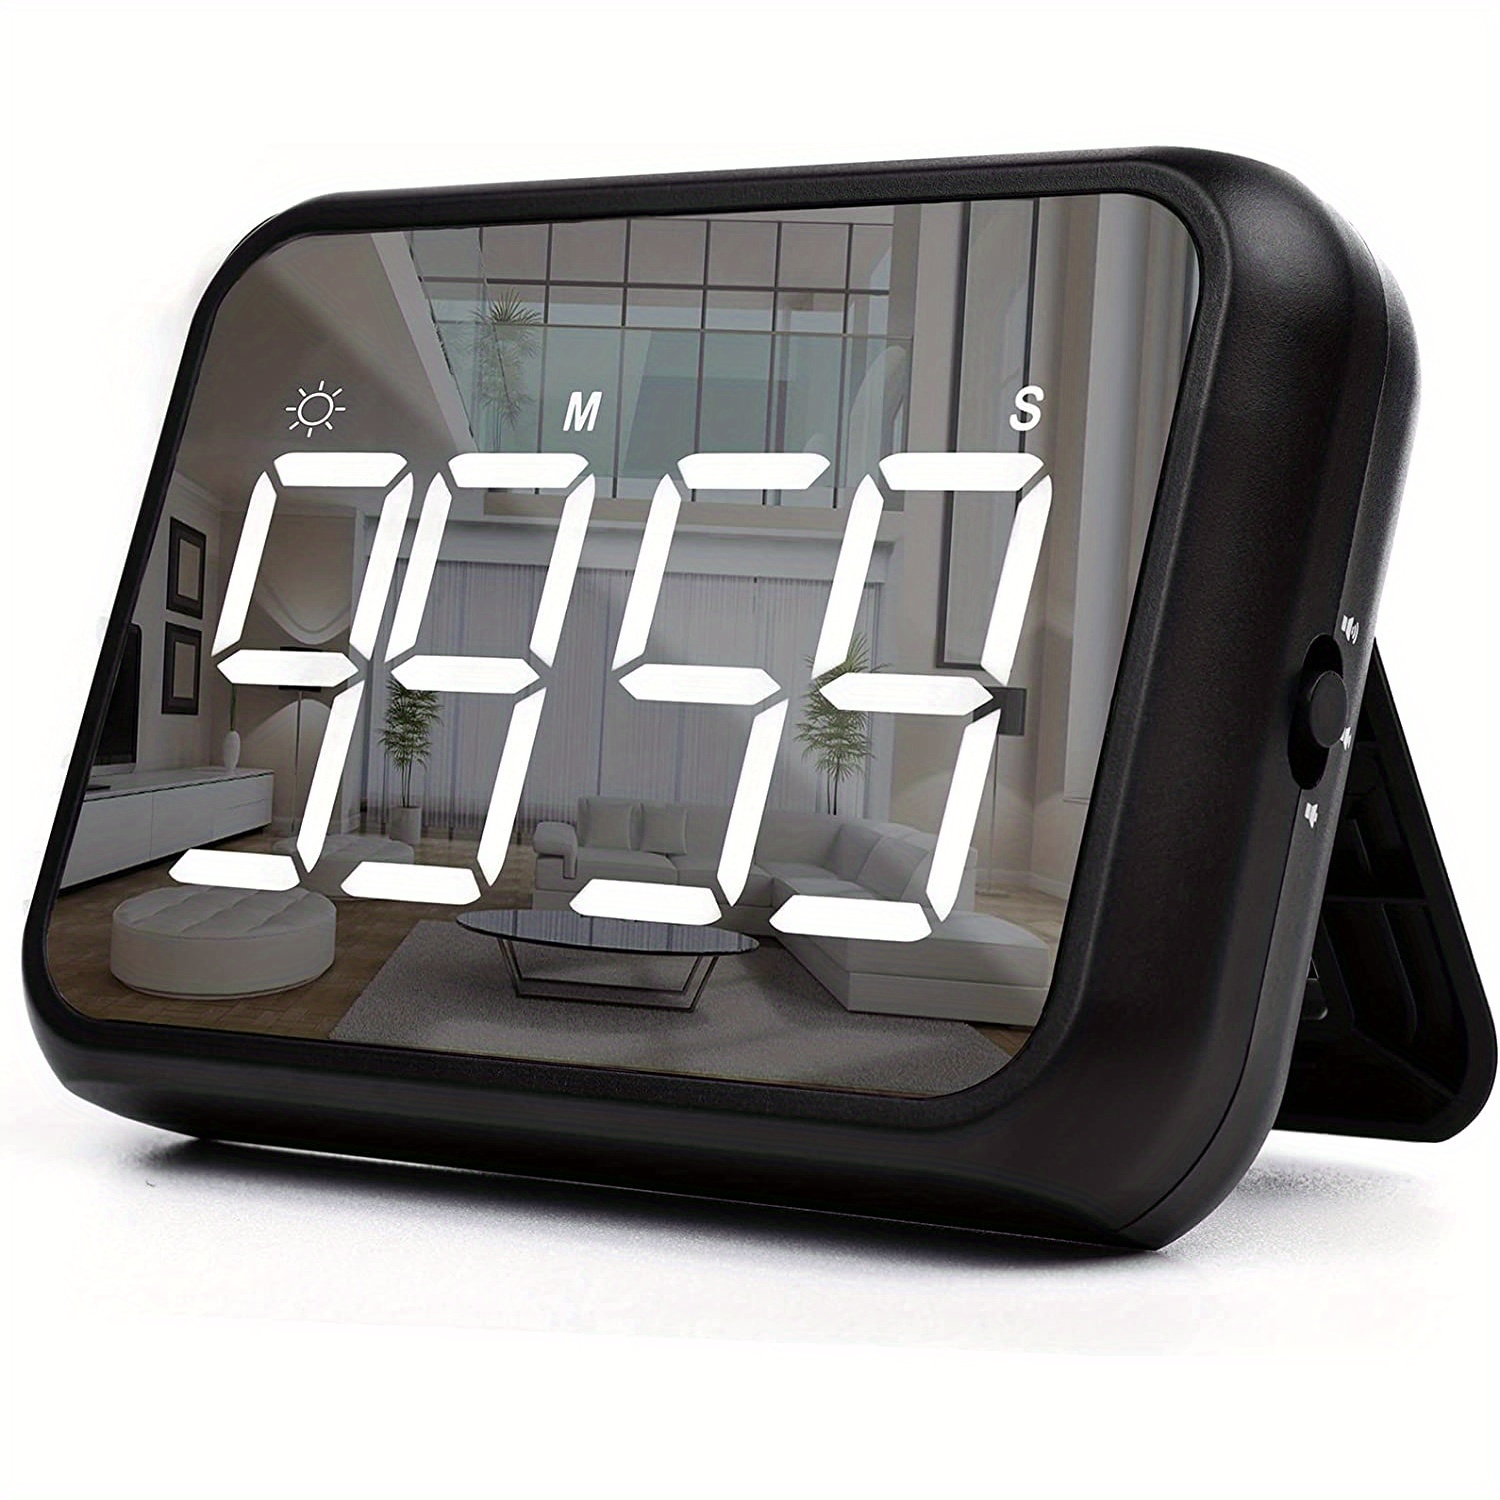 Digital Kitchen Timers, Visual Timers Large LED Display Magnetic